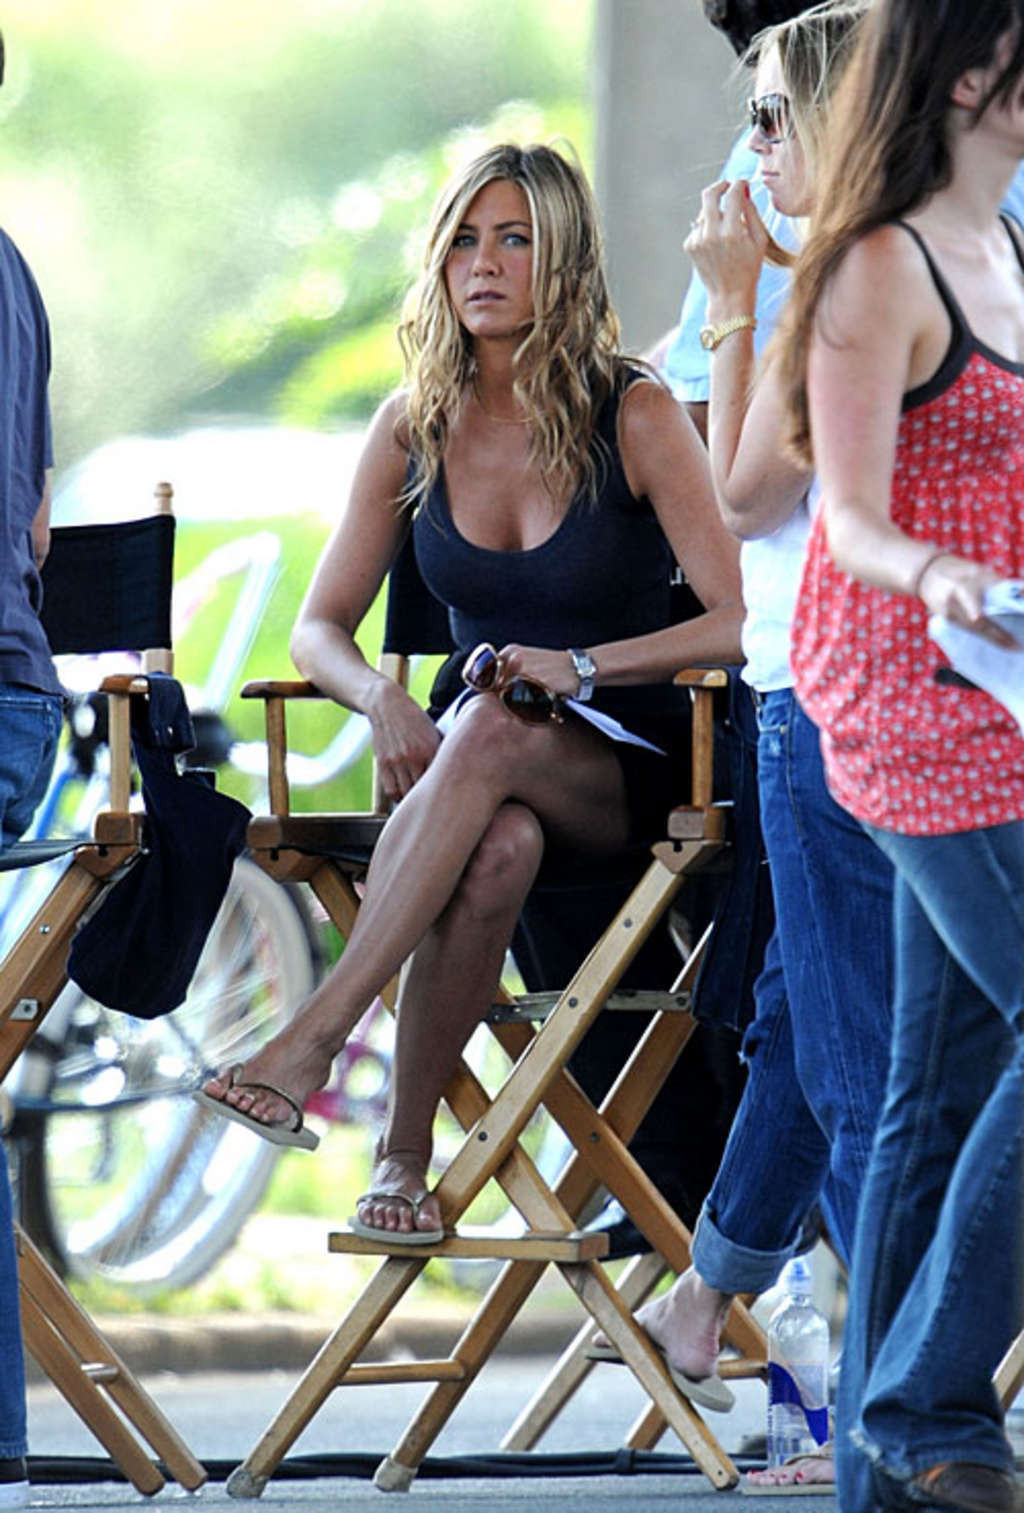 Jennifer Aniston almost upskirt and exposing her great tits and nice legs #75383871